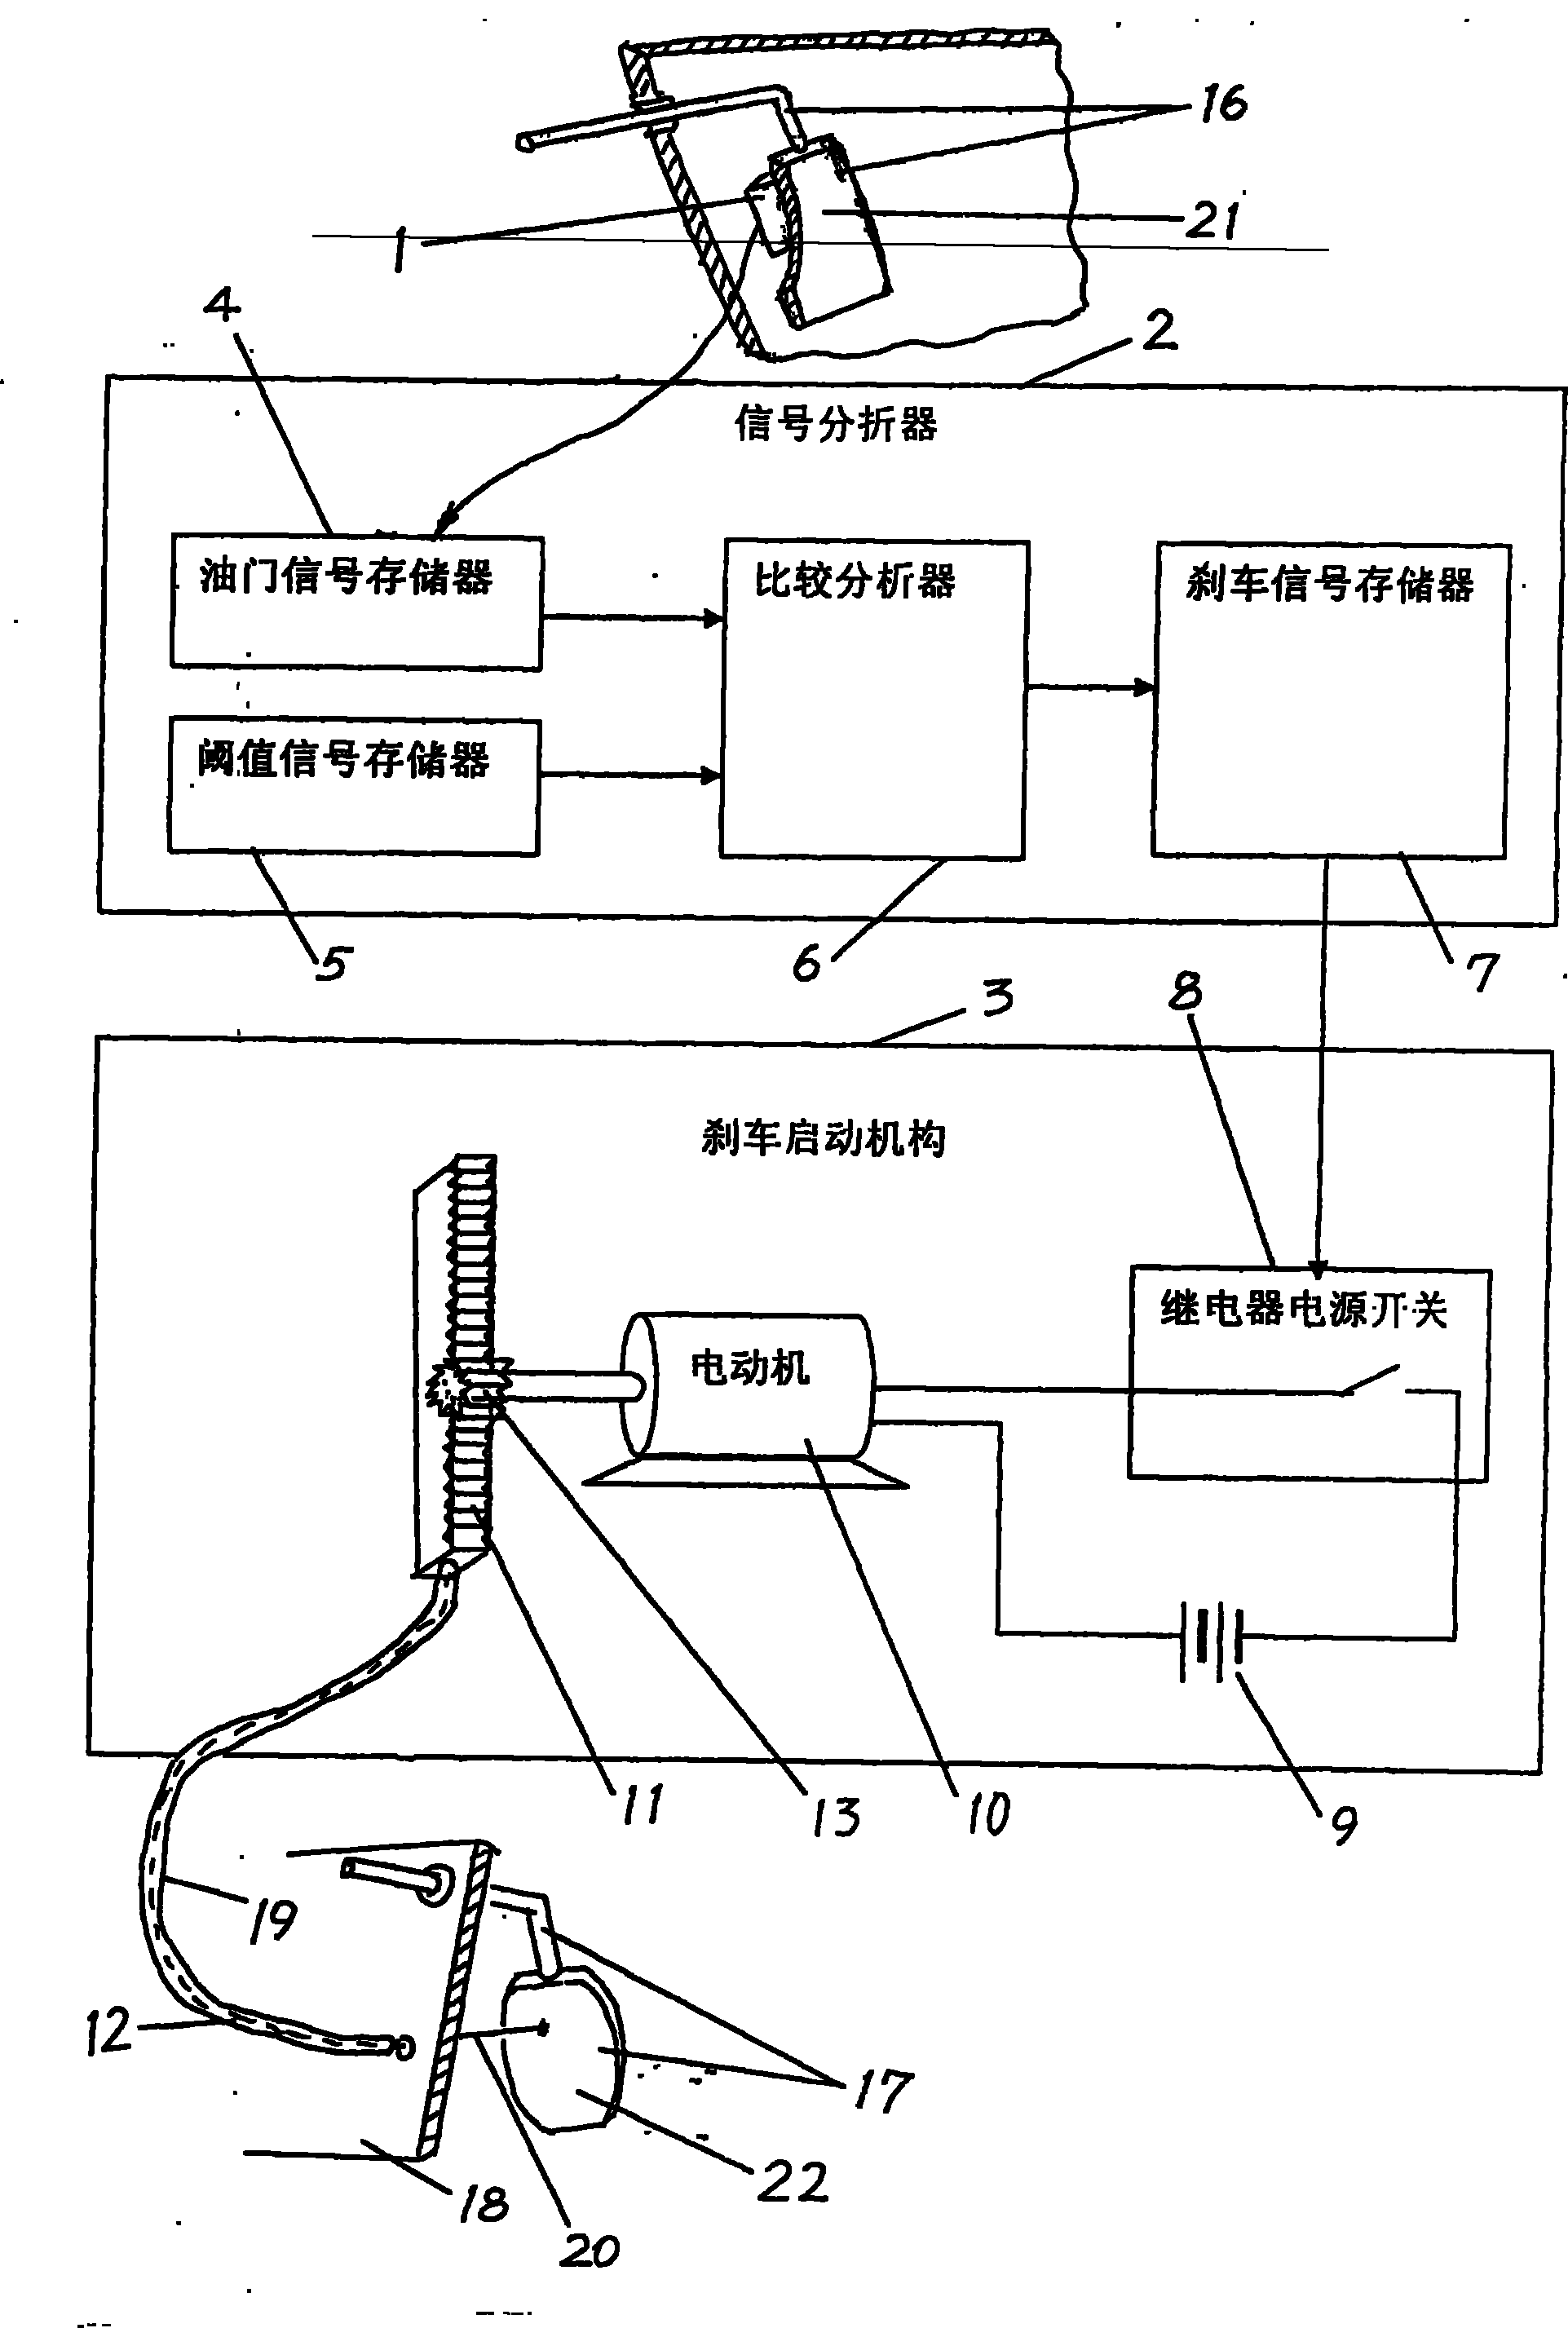 Motor vehicle with device for correcting operation of stepping on accelerator by mistake as operation of braking